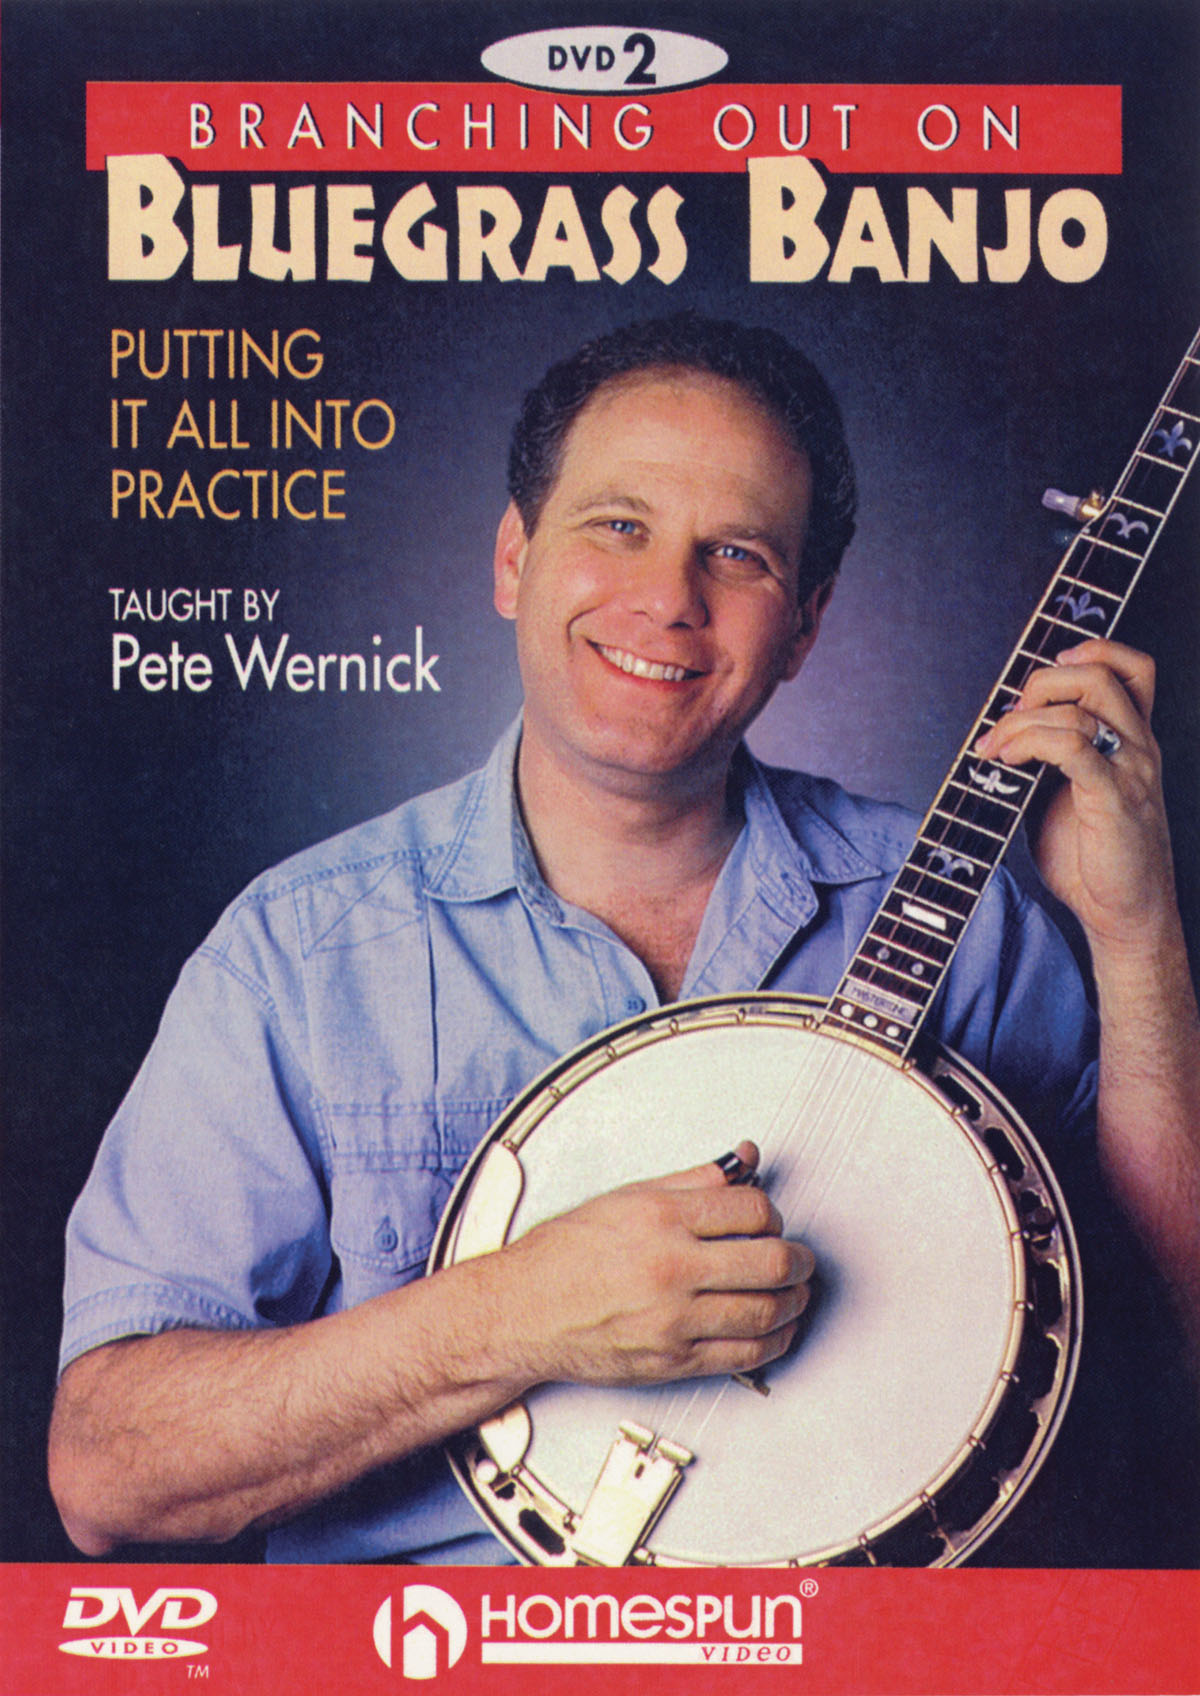 Branching Out On Bluegrass Banjo 2 - Putting It All Into Practice